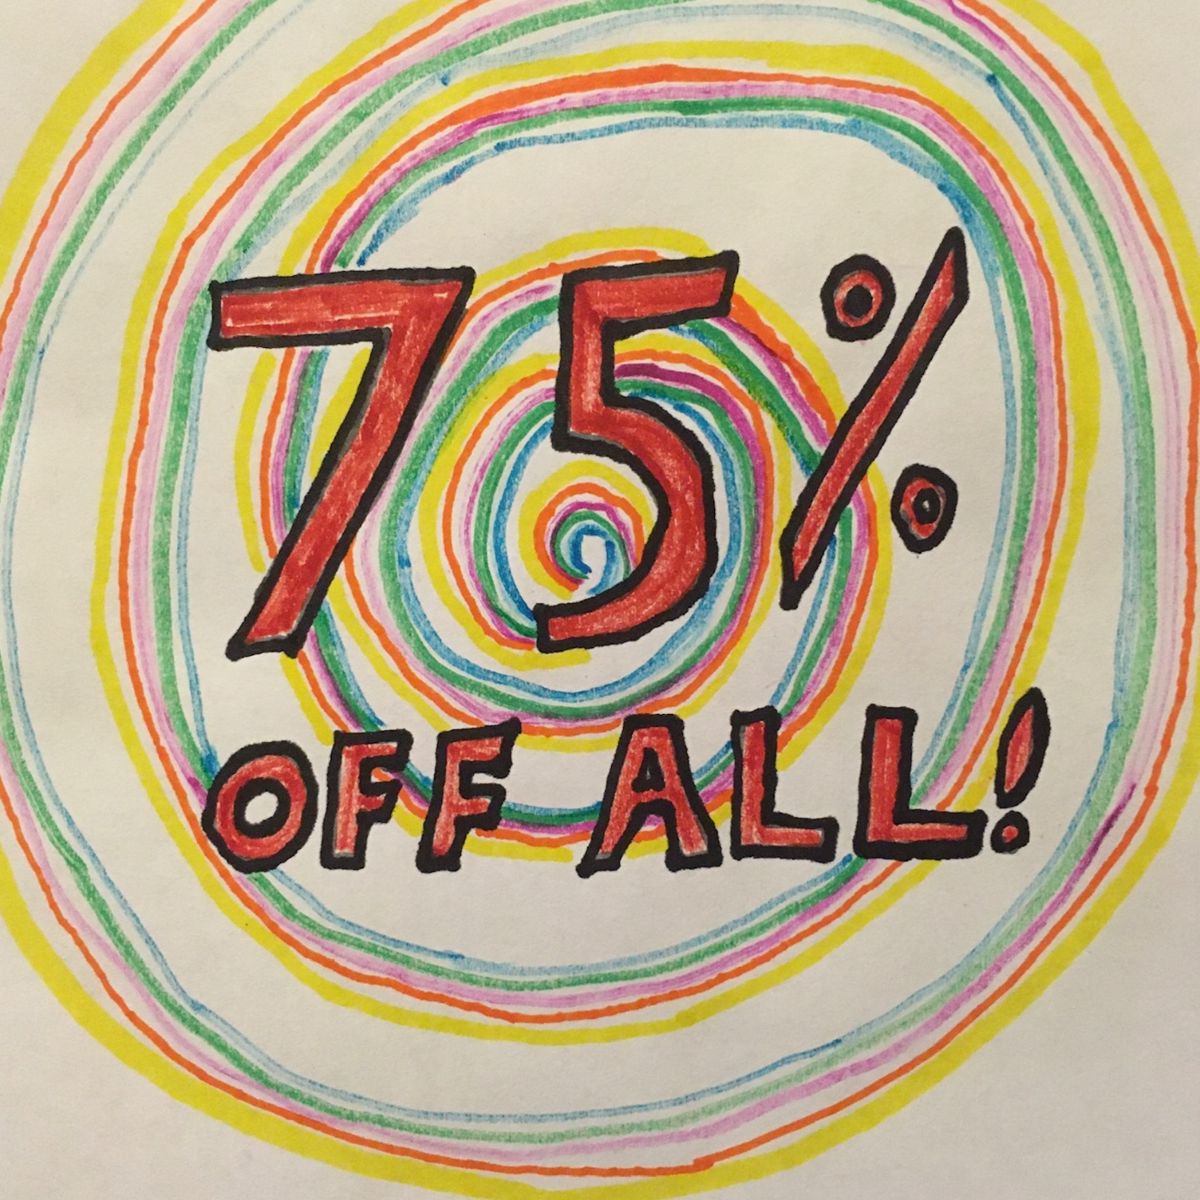 Yep, 75% off all at 1:00 SUNDAY! 
Cash only!